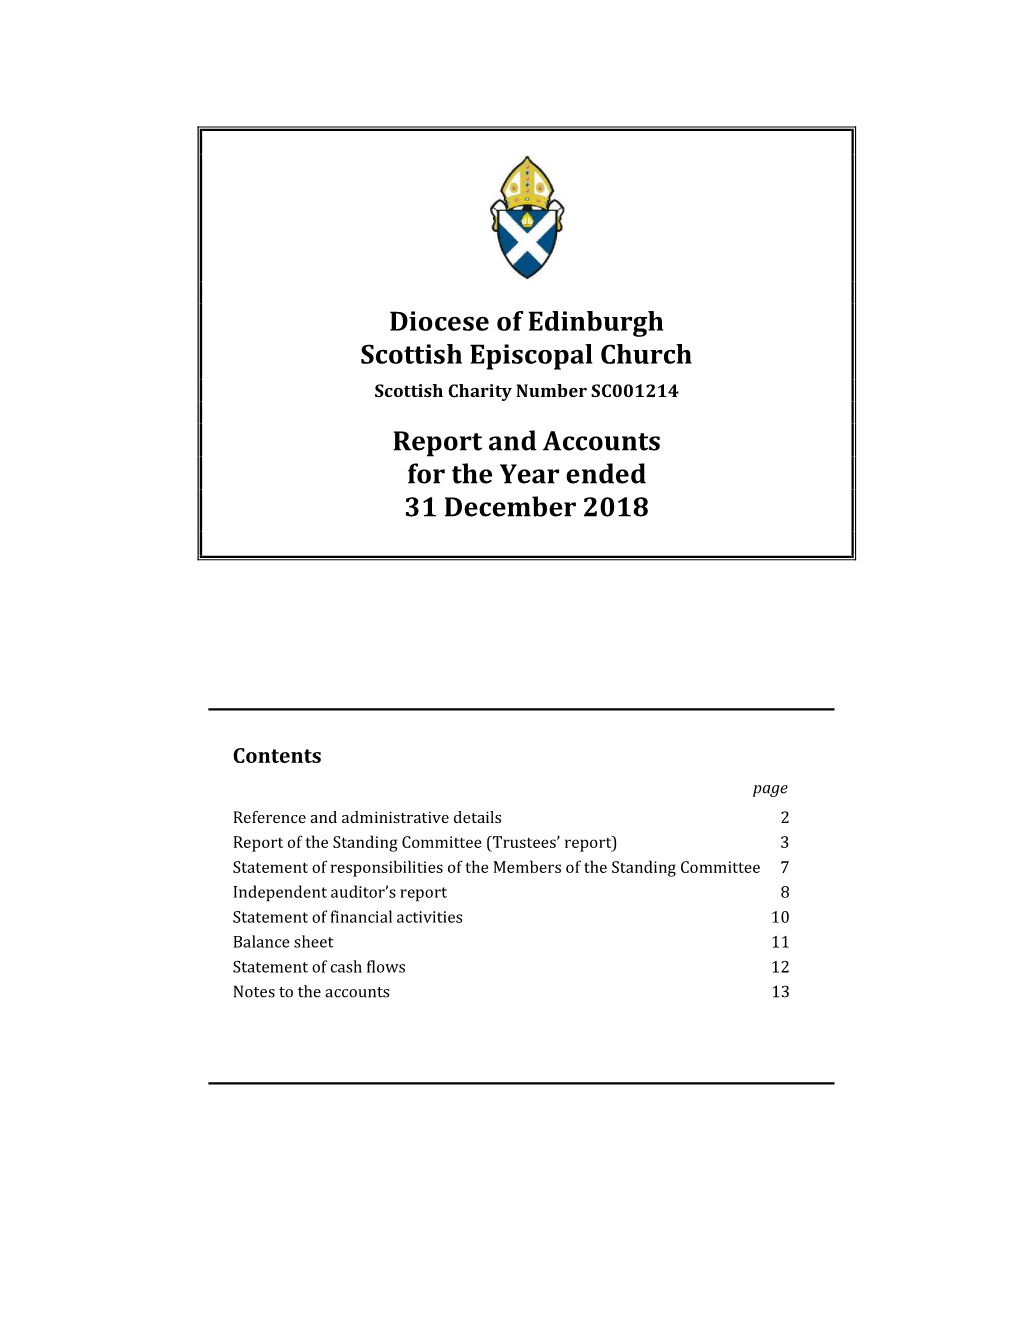 Diocese of Edinburgh Scottish Episcopal Church Scottish Charity Number SC001214 Report and Accounts for the Year Ended 31 December 2018